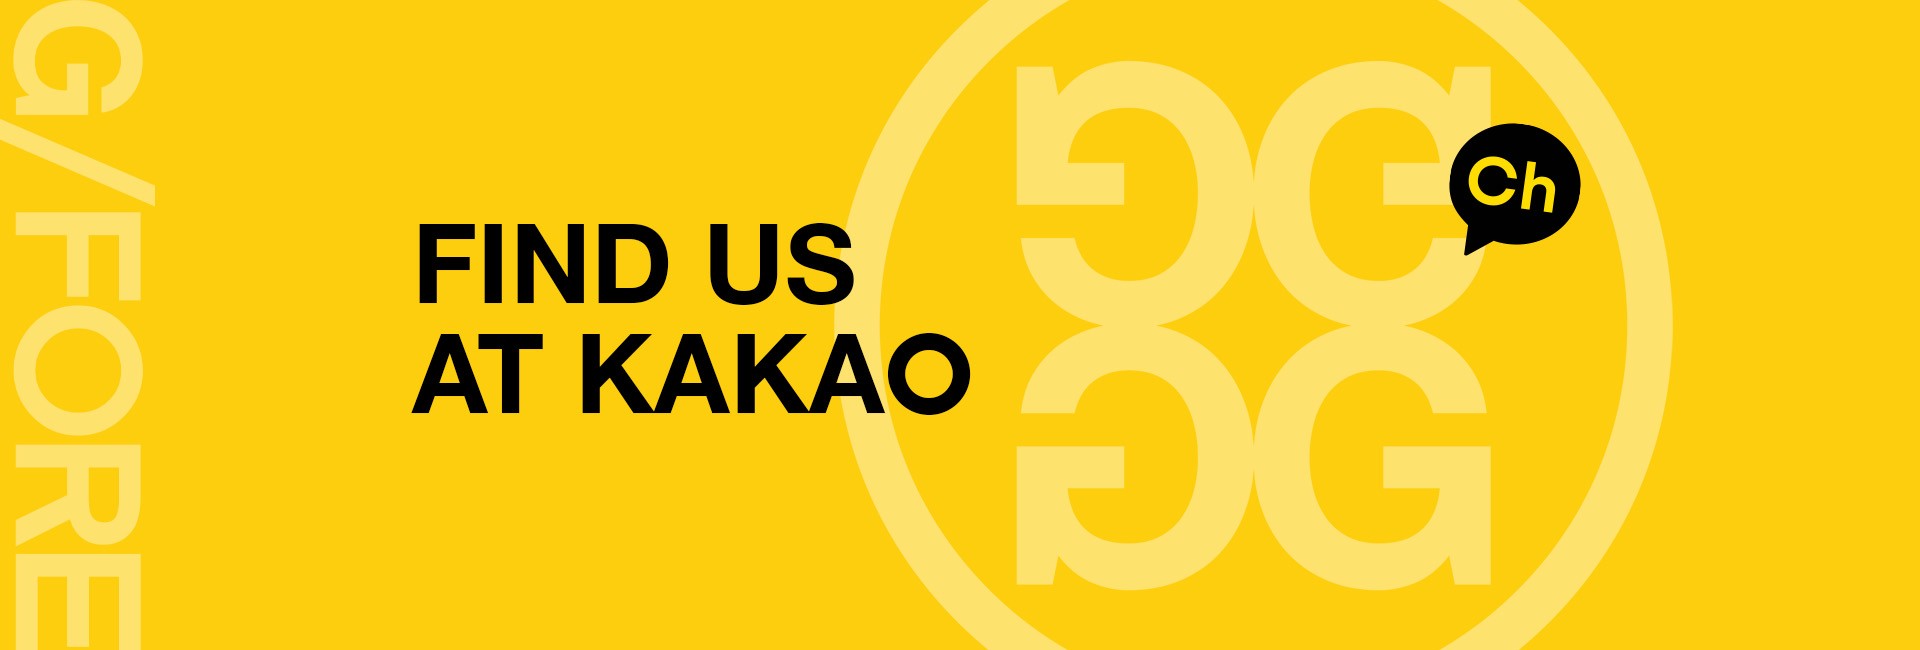 FIND US AT KAKAO